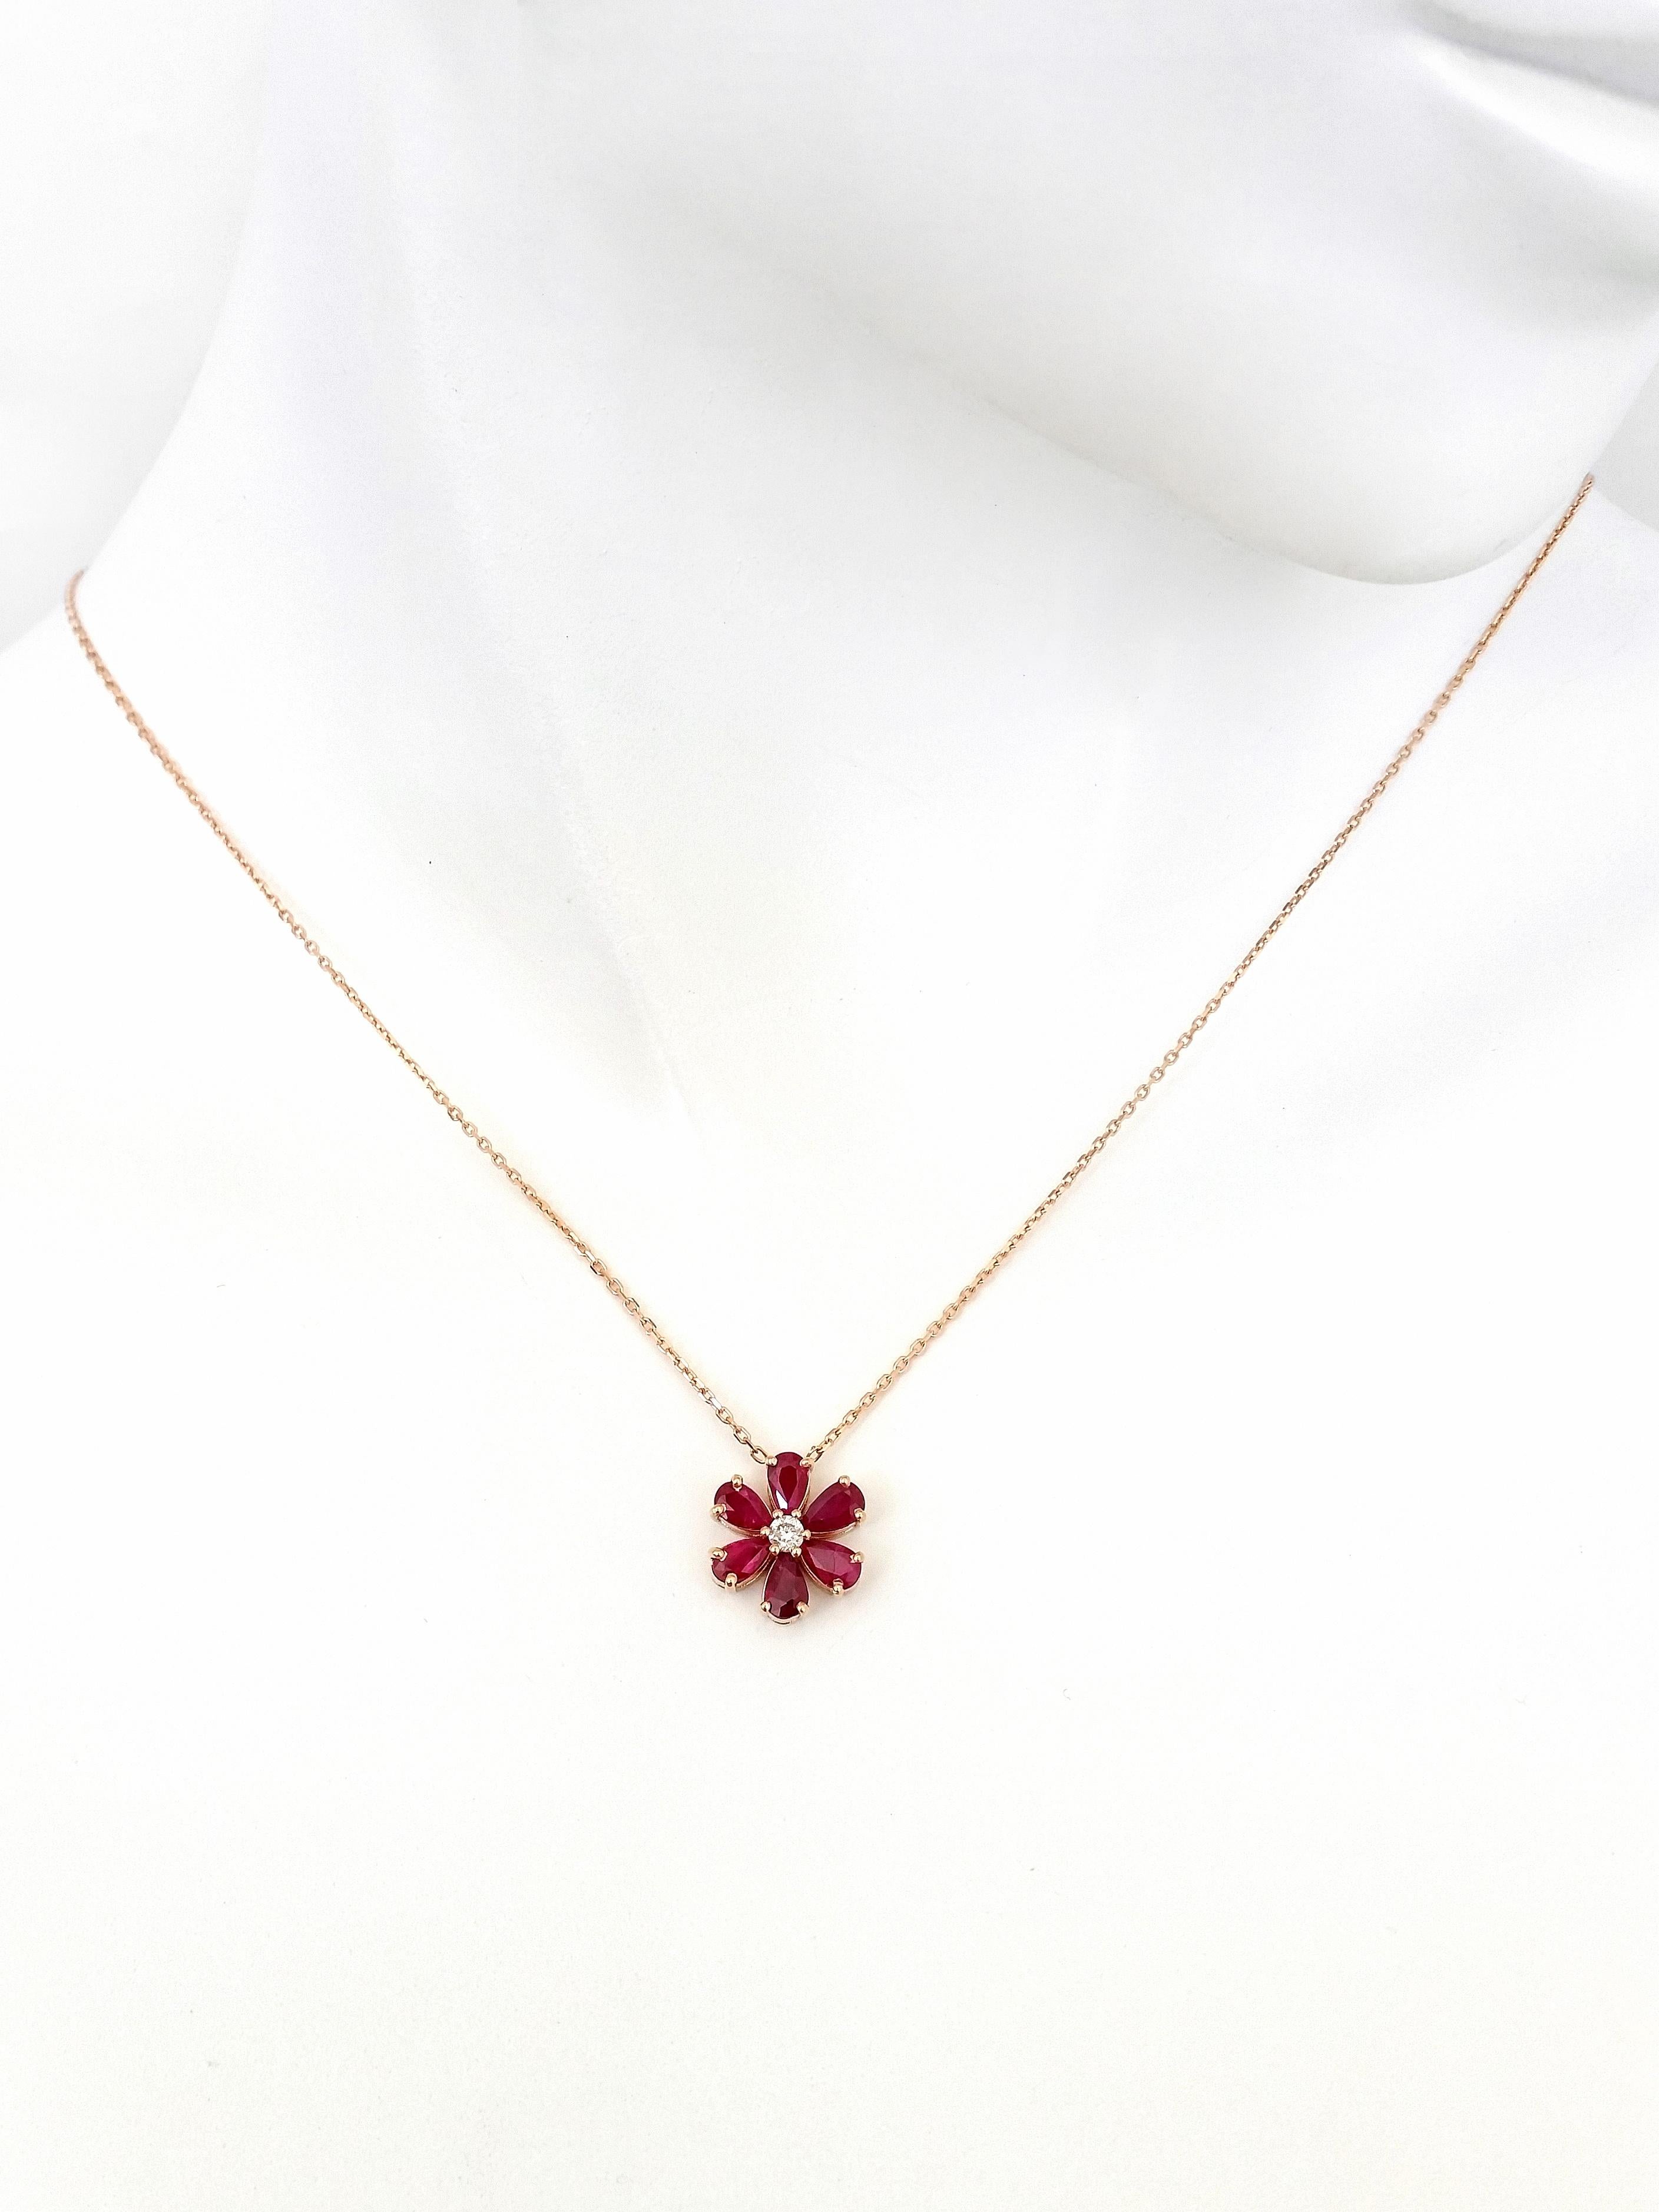 Women's or Men's NO RESERVE PRICE 1.26ctw  Ruby and Diamond Flower Pendant 14K Rose Gold 